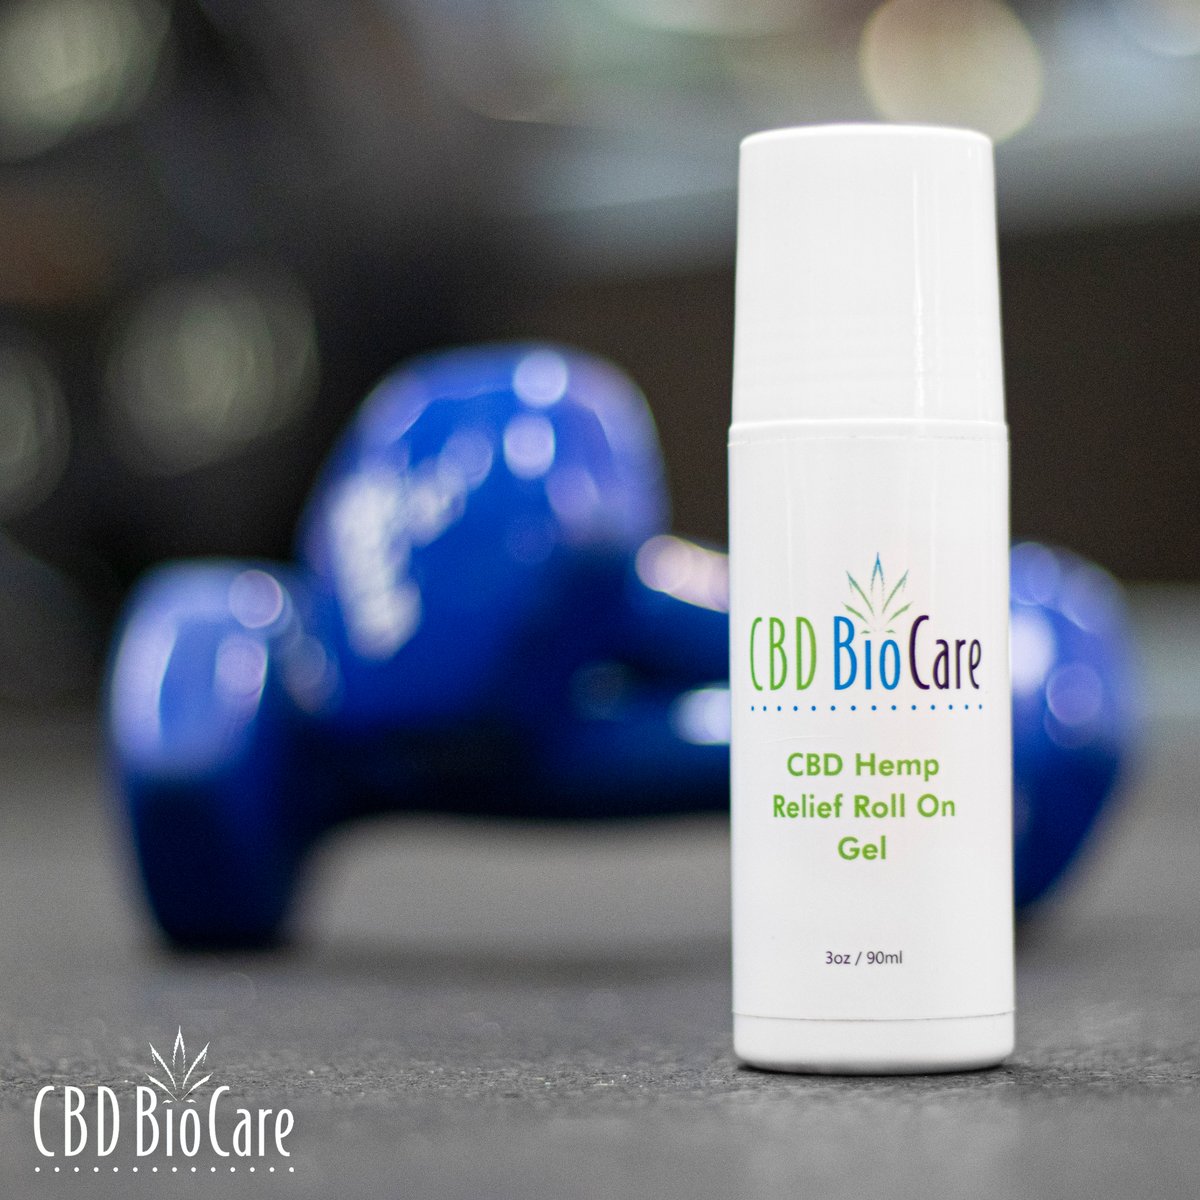 This product is amazing for those with an active lifestyles and dealing with pain from injuries that come with it! check it out at cbdbiocare.com/pages/zenatural and enter the code for a discount! #CBD #active #Natural #Relief #cbdpain #Zen